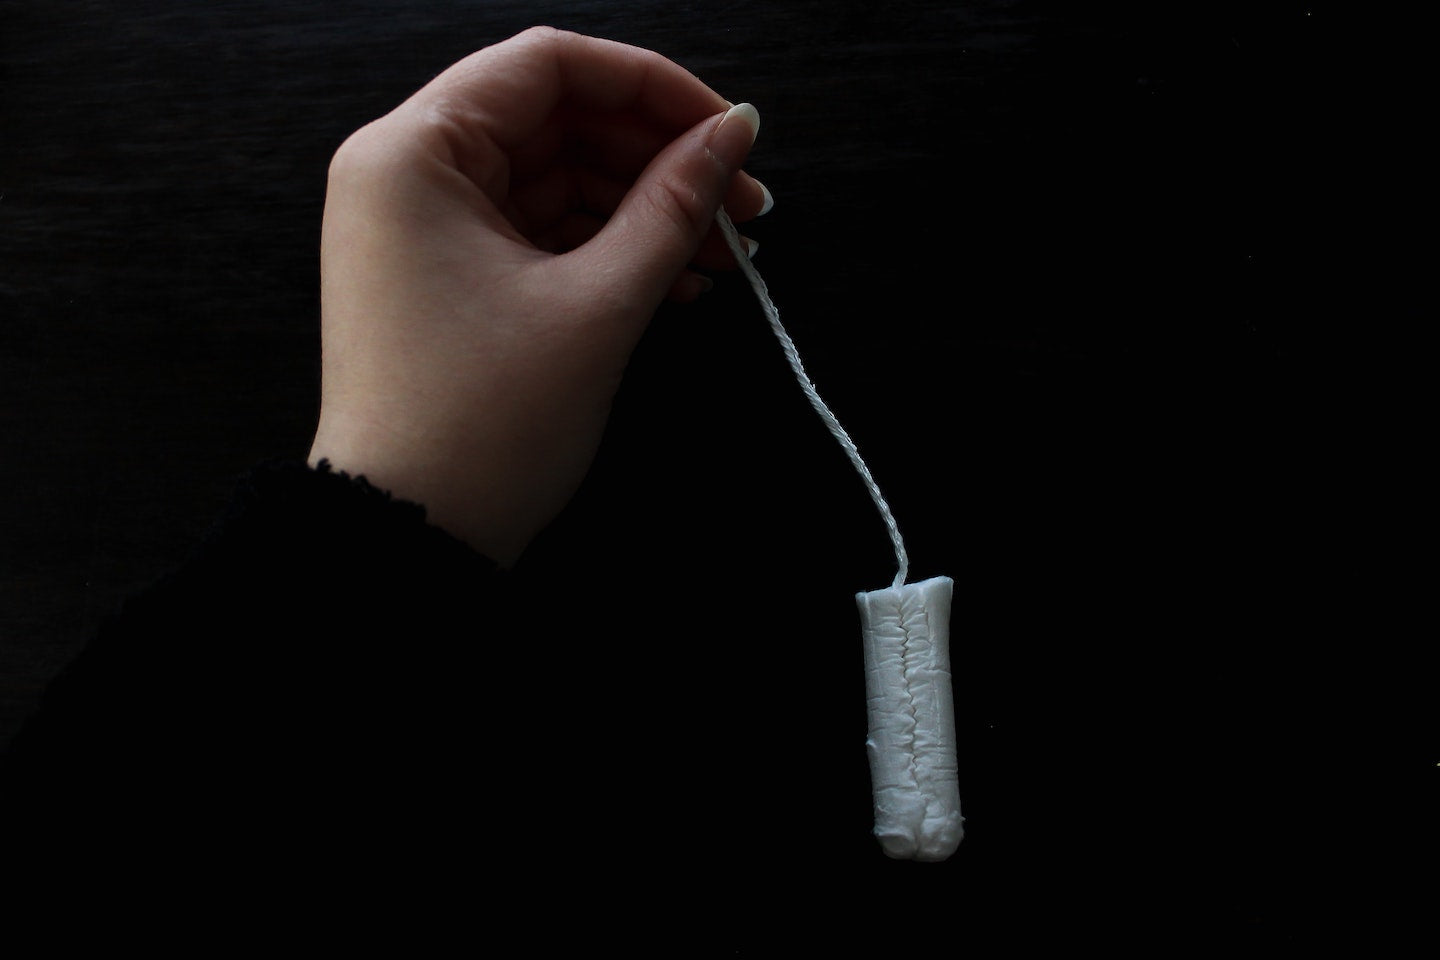 A hand holding a tampon by the string. The tampon dangles. The background is black.